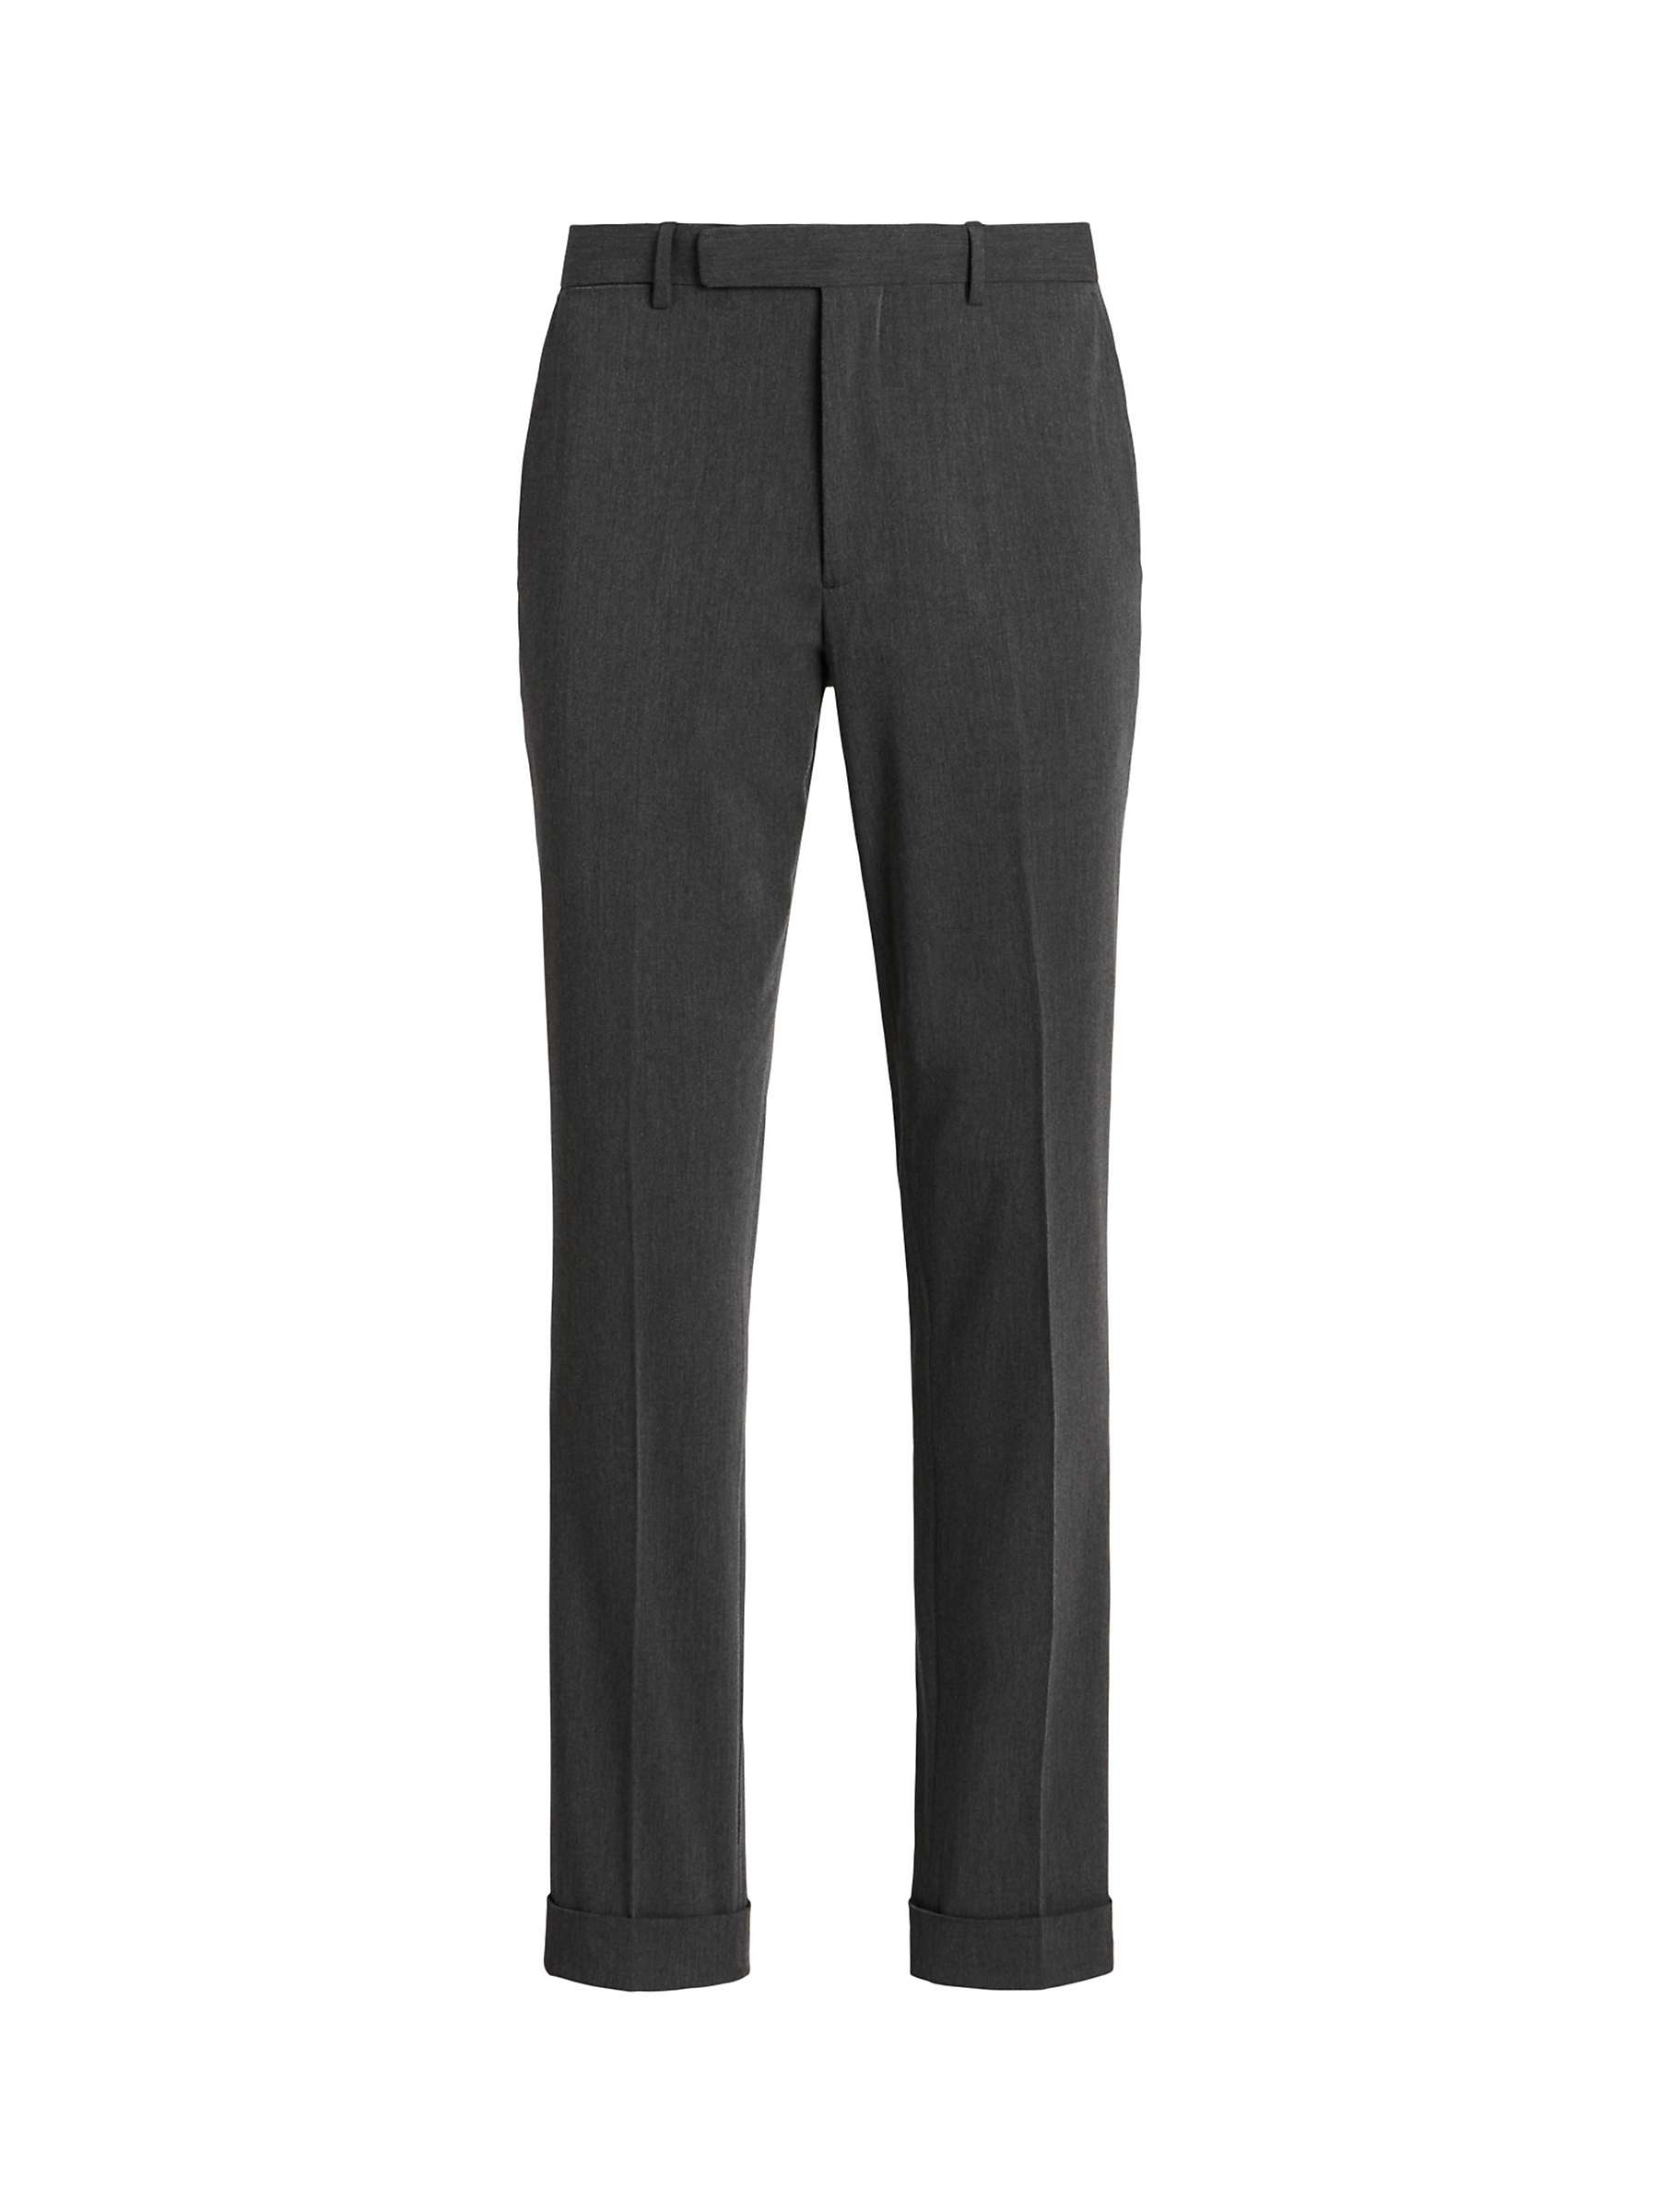 Buy Polo Ralph Lauren Performance Stretch Twill Trousers, Charcoal Online at johnlewis.com